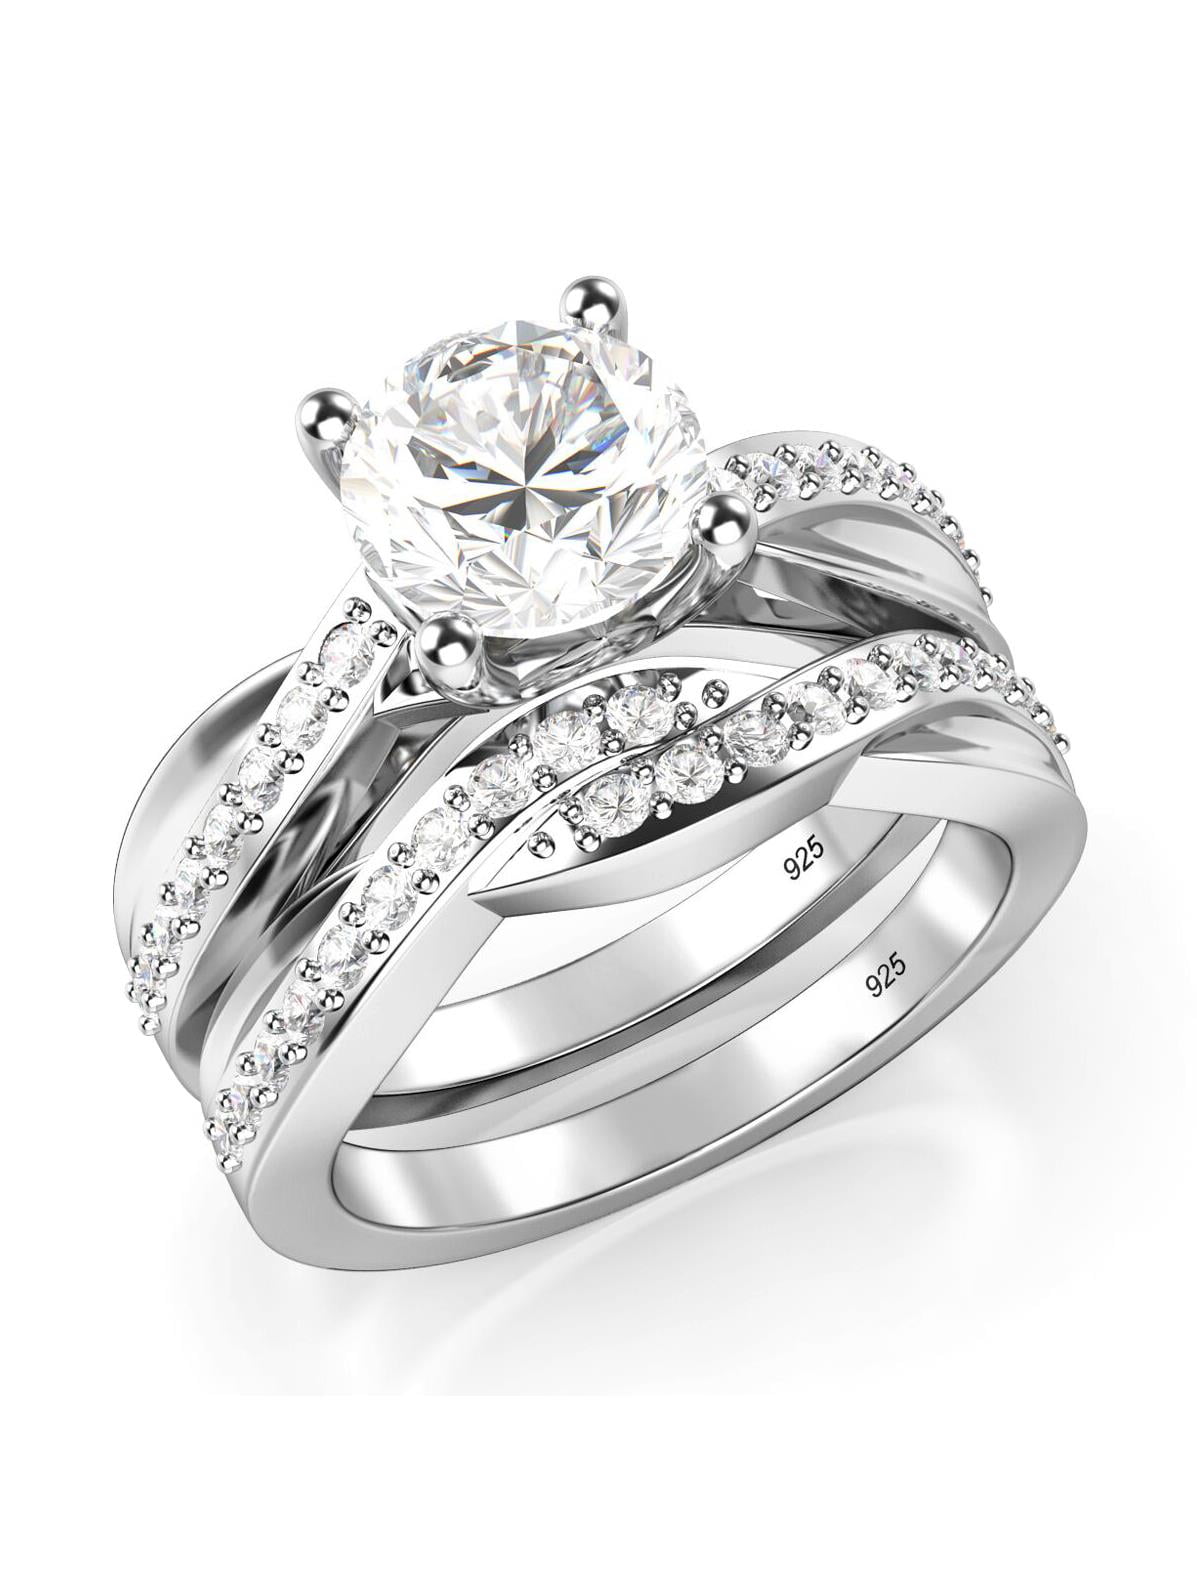 Round Shape 1.75 Ct Cubic Zirconia Bridal Ring Set In 925 Sterling Silver 